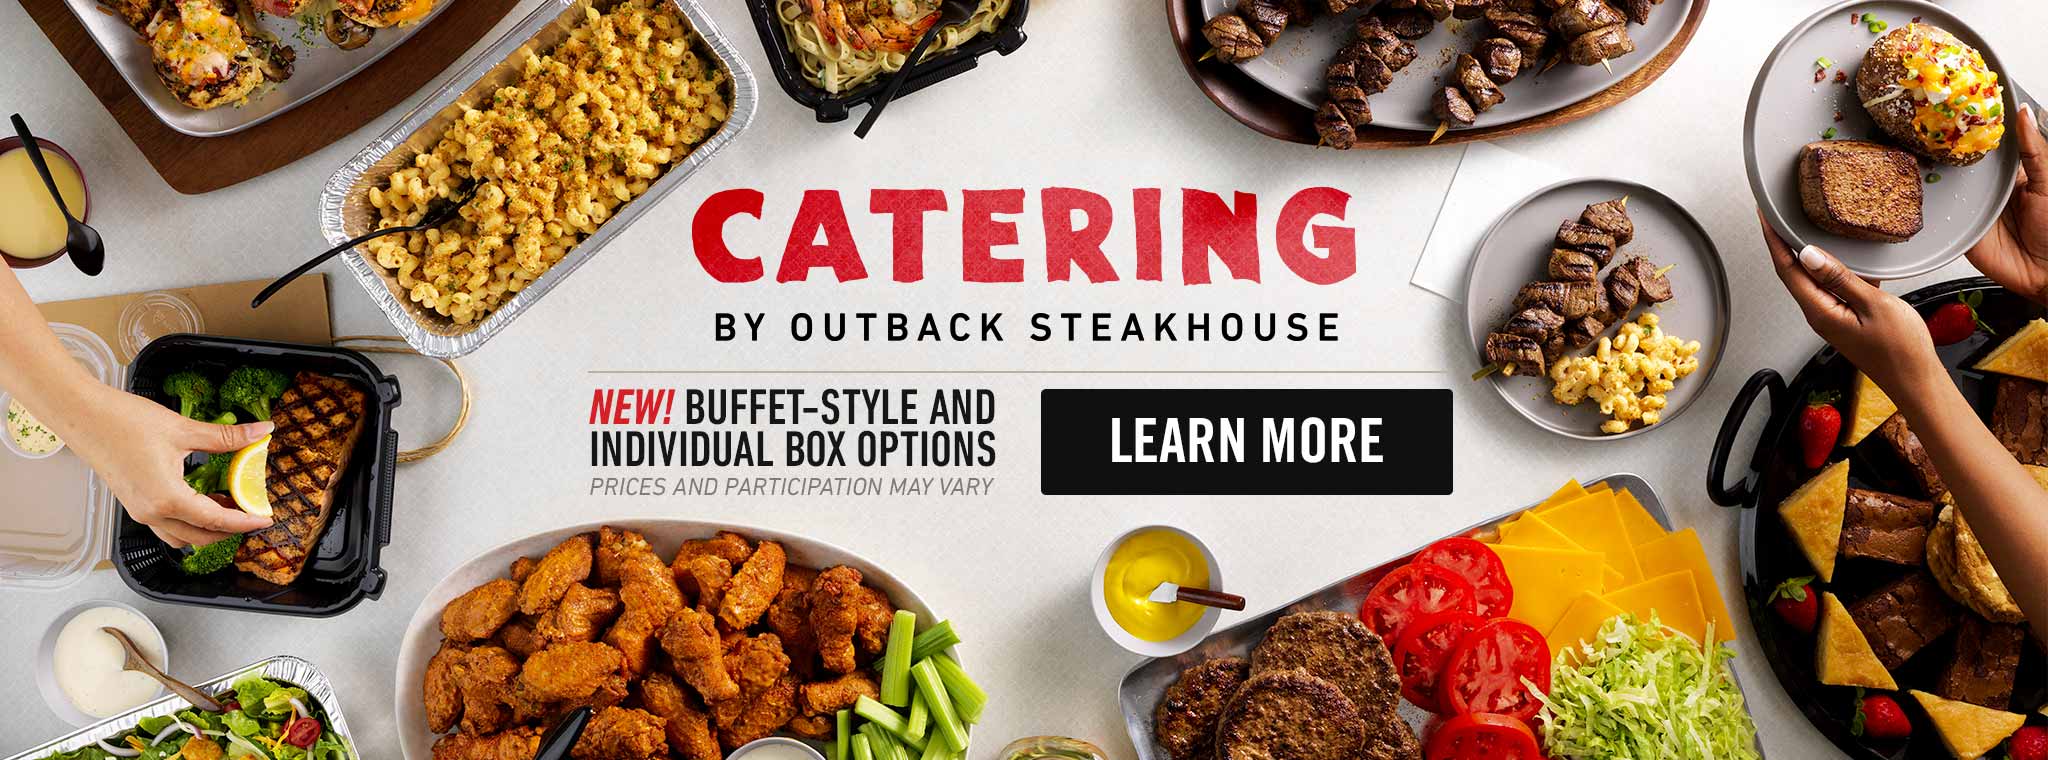 Catering. New buffet-style and individual box options.